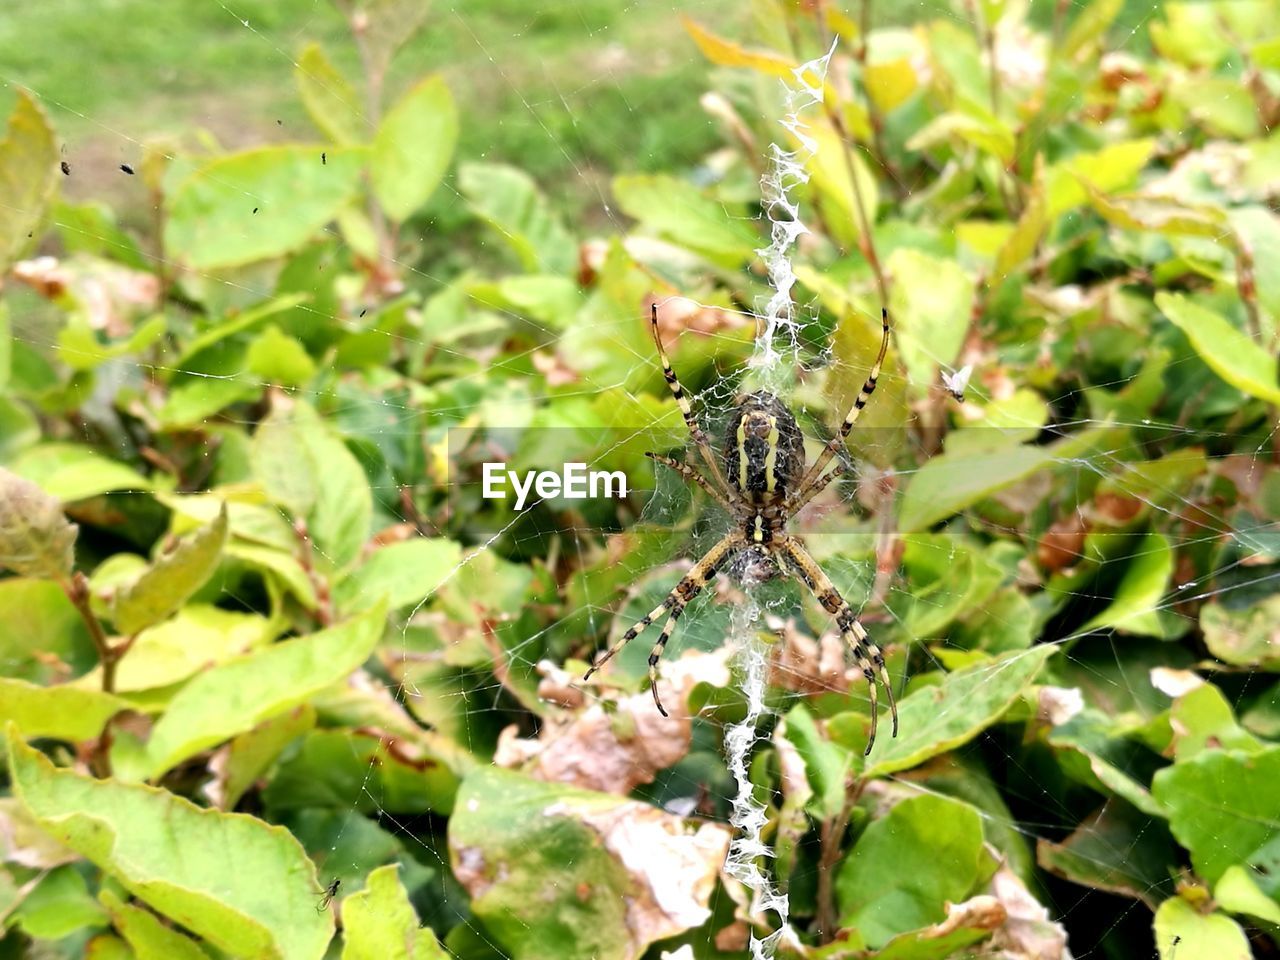 CLOSE-UP OF SPIDER ON WEB AGAINST PLANTS